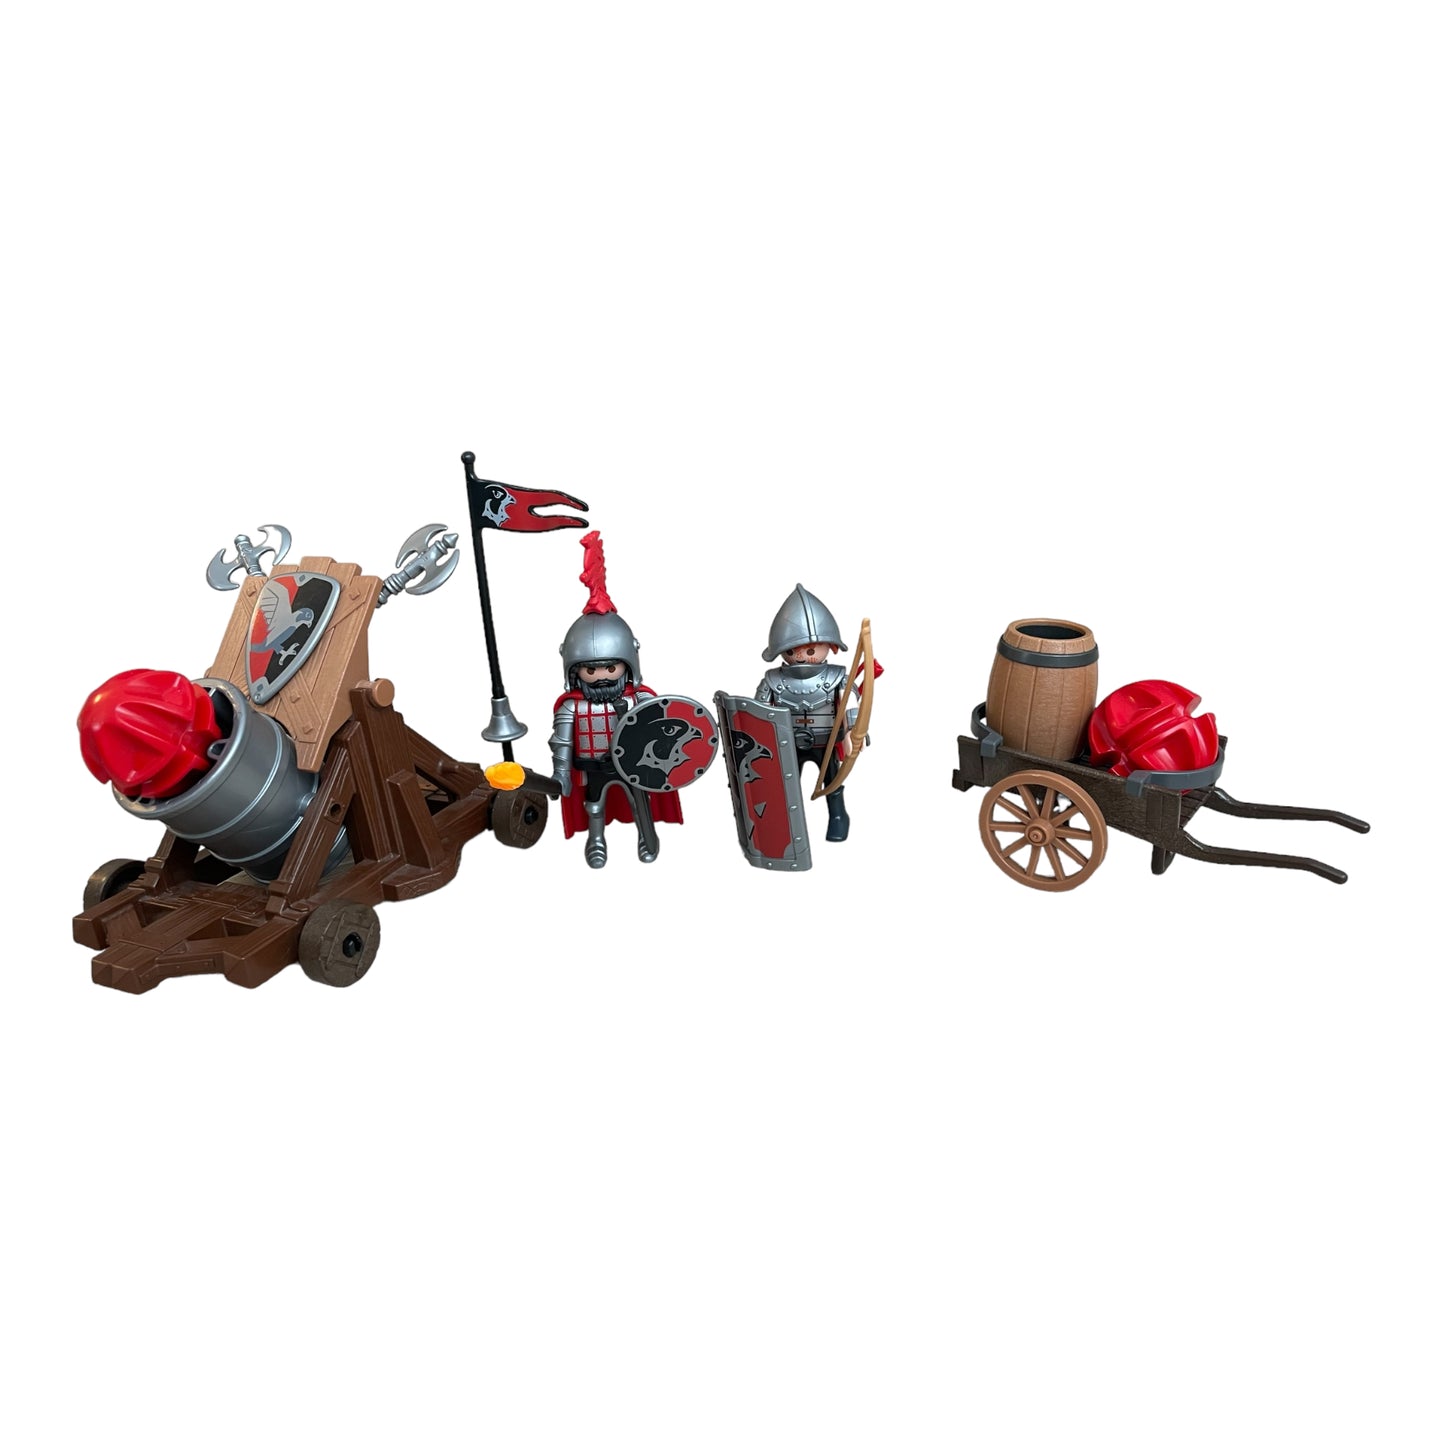 Playmobil ® - Giant Canon of the falcon knights - 6038